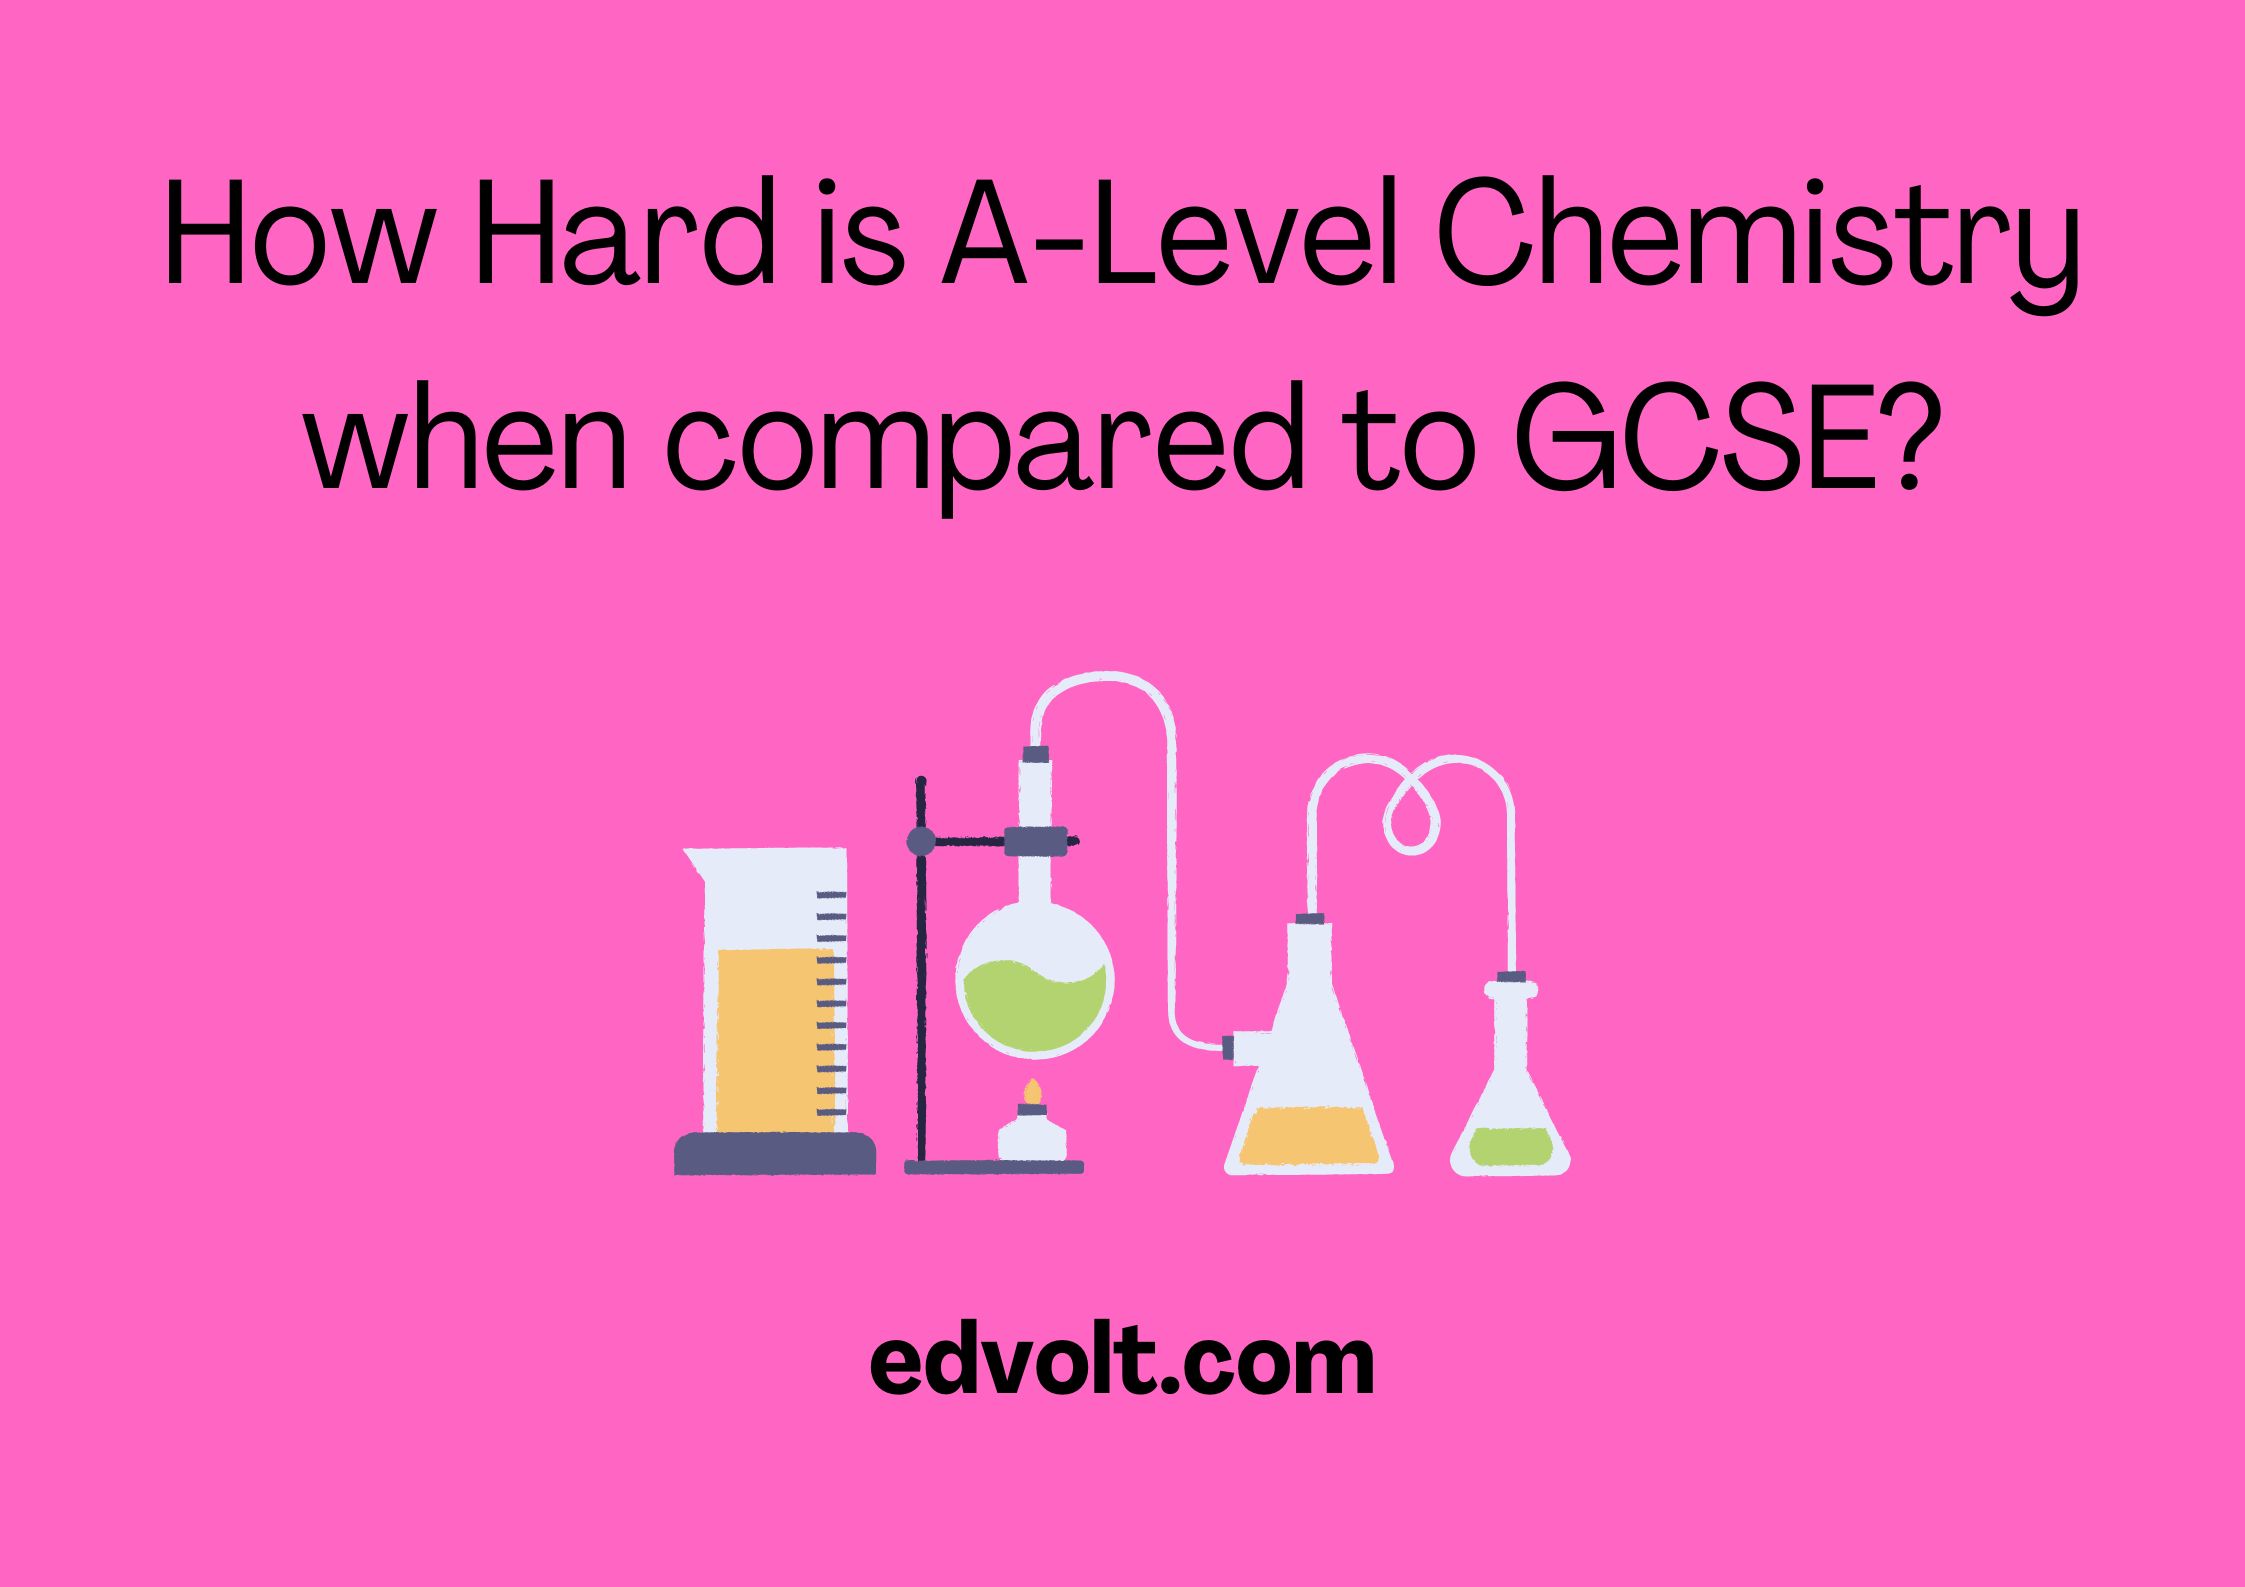 How Hard is A-Level Chemistry when compared to GCSE?